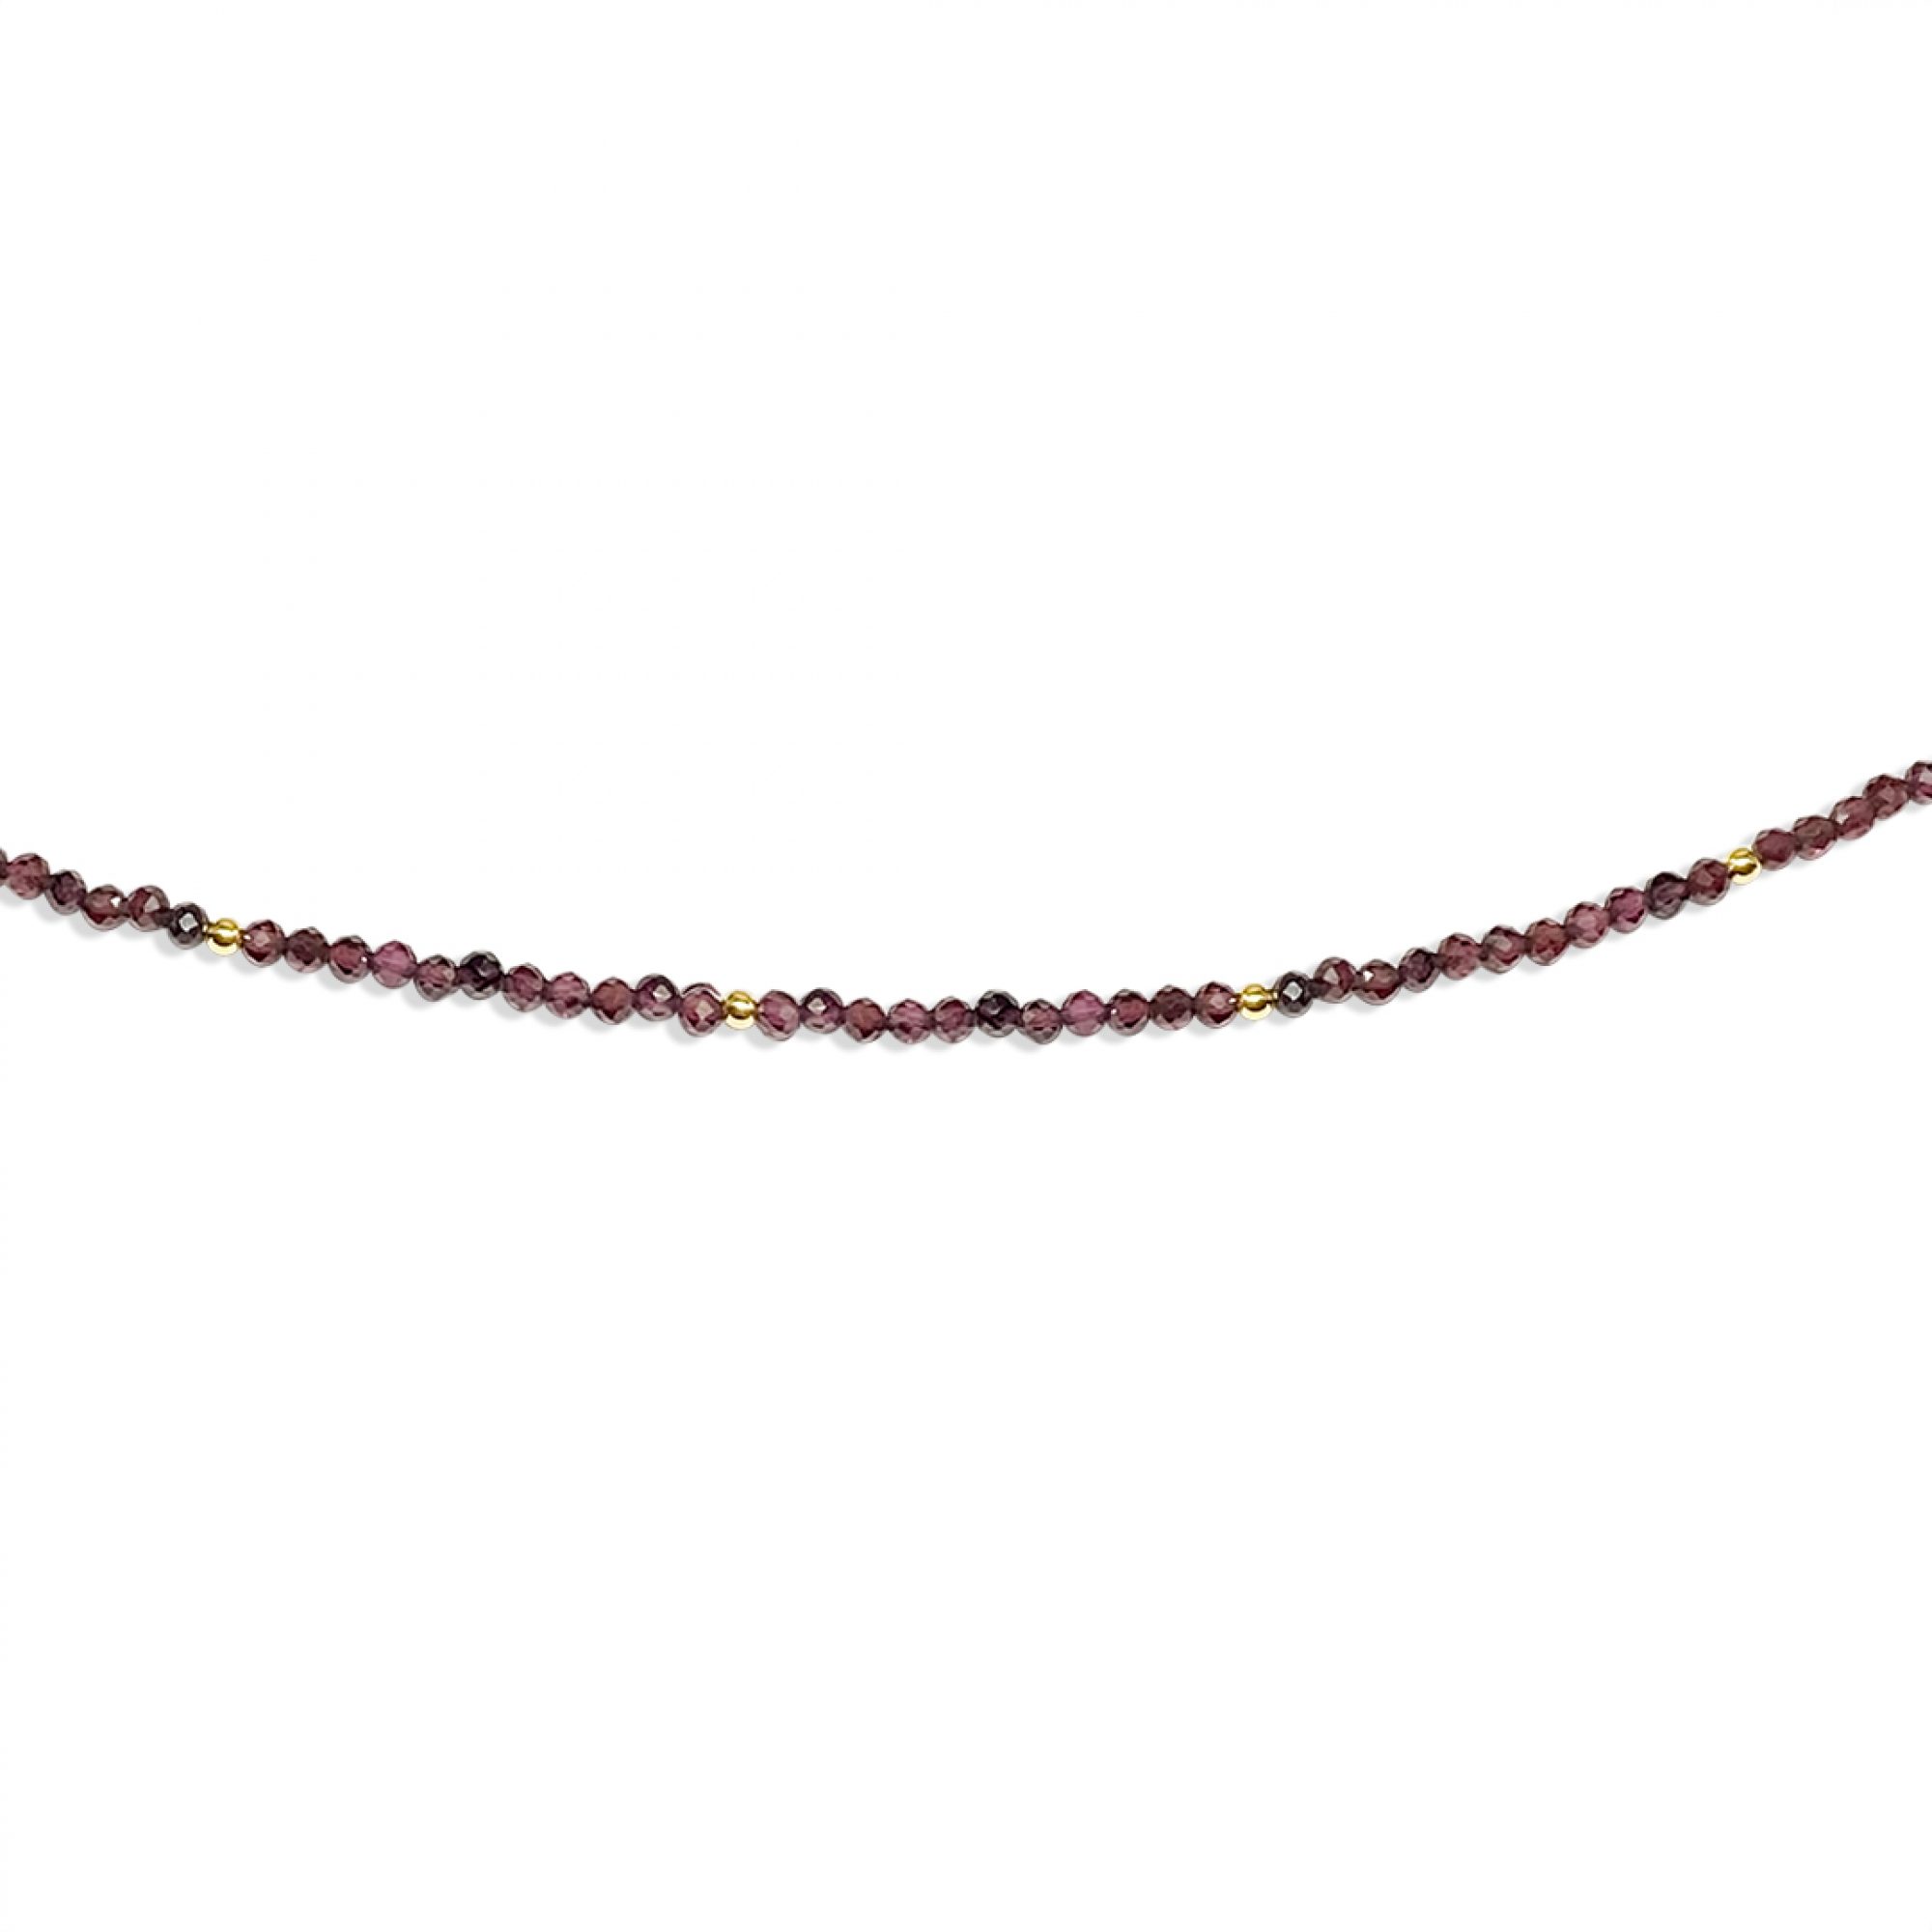 Gold plated anklet with garnet beads